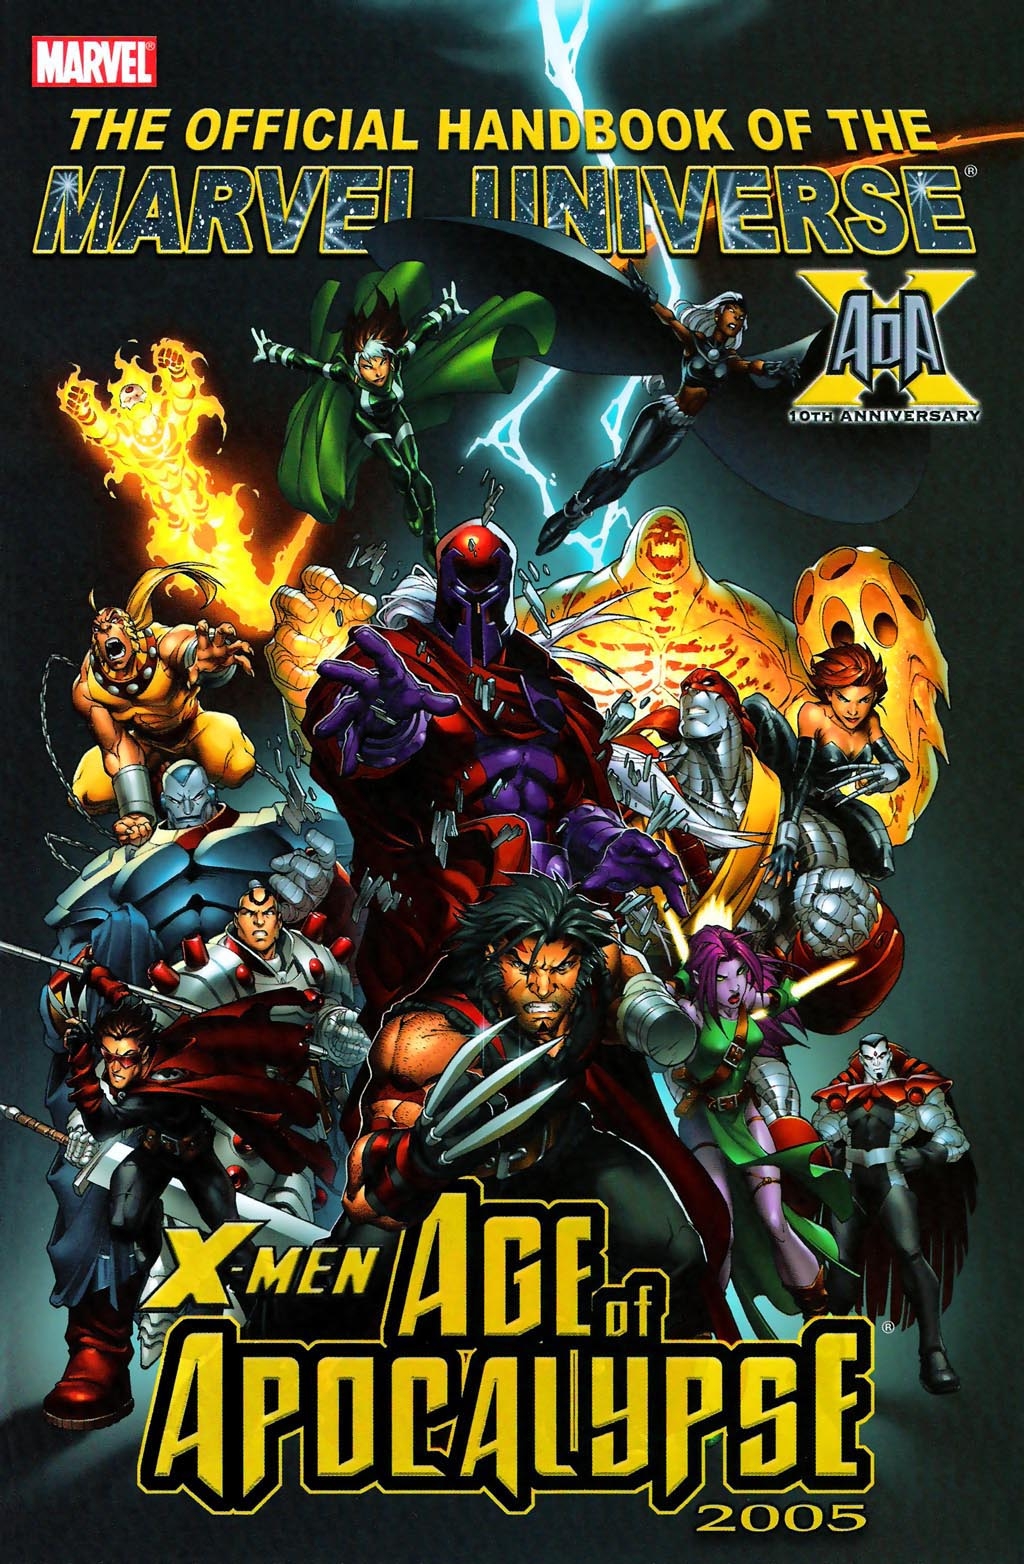 Read online Official Handbook of the Marvel Universe: X-Men Age of Apocalypse 2005 comic -  Issue # Full - 1